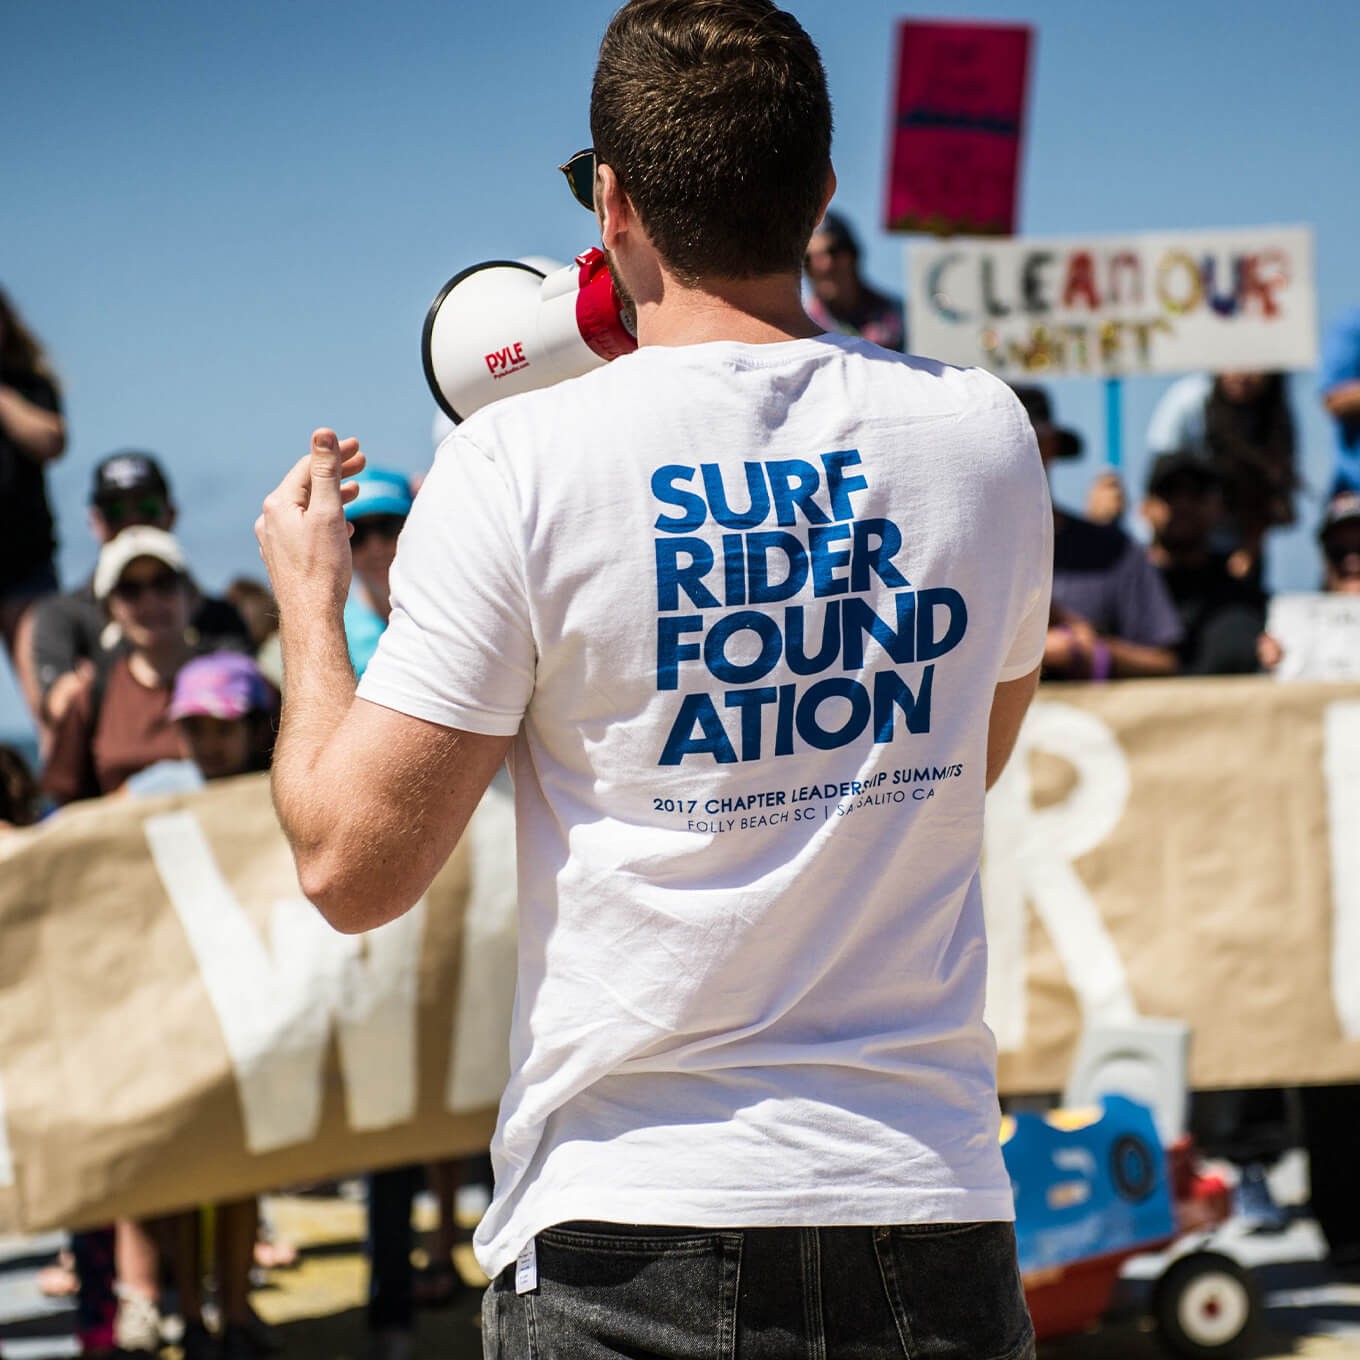 Man wearing Surfrider shirt with megaphone faces crowd of activists.